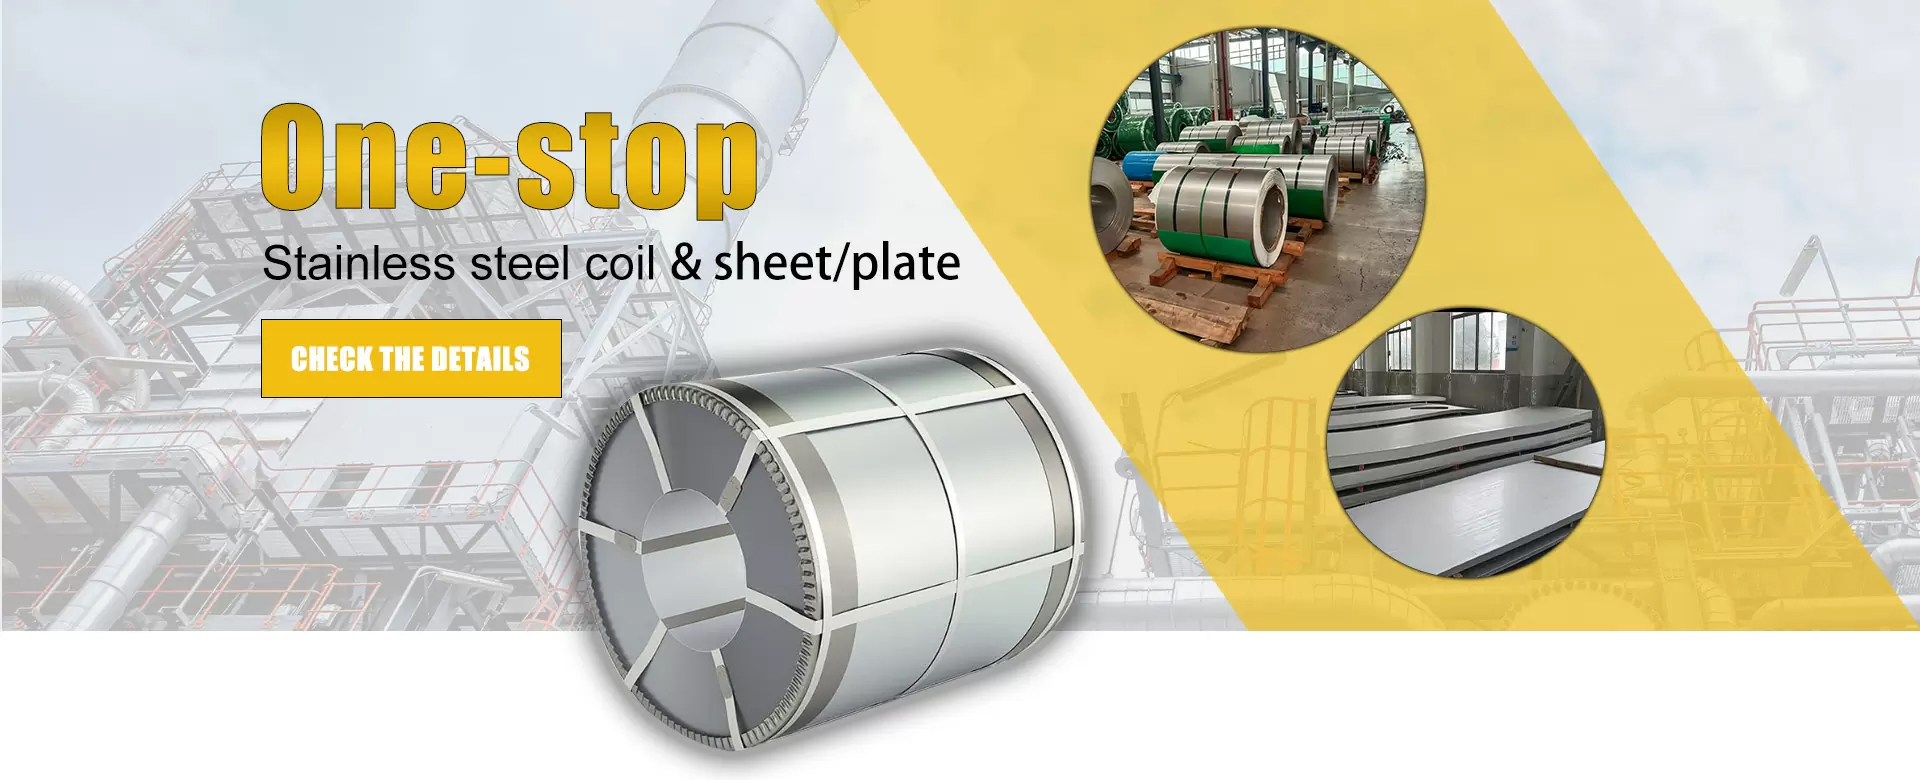 Onc-ston Stainless steel coil & sheet/plate